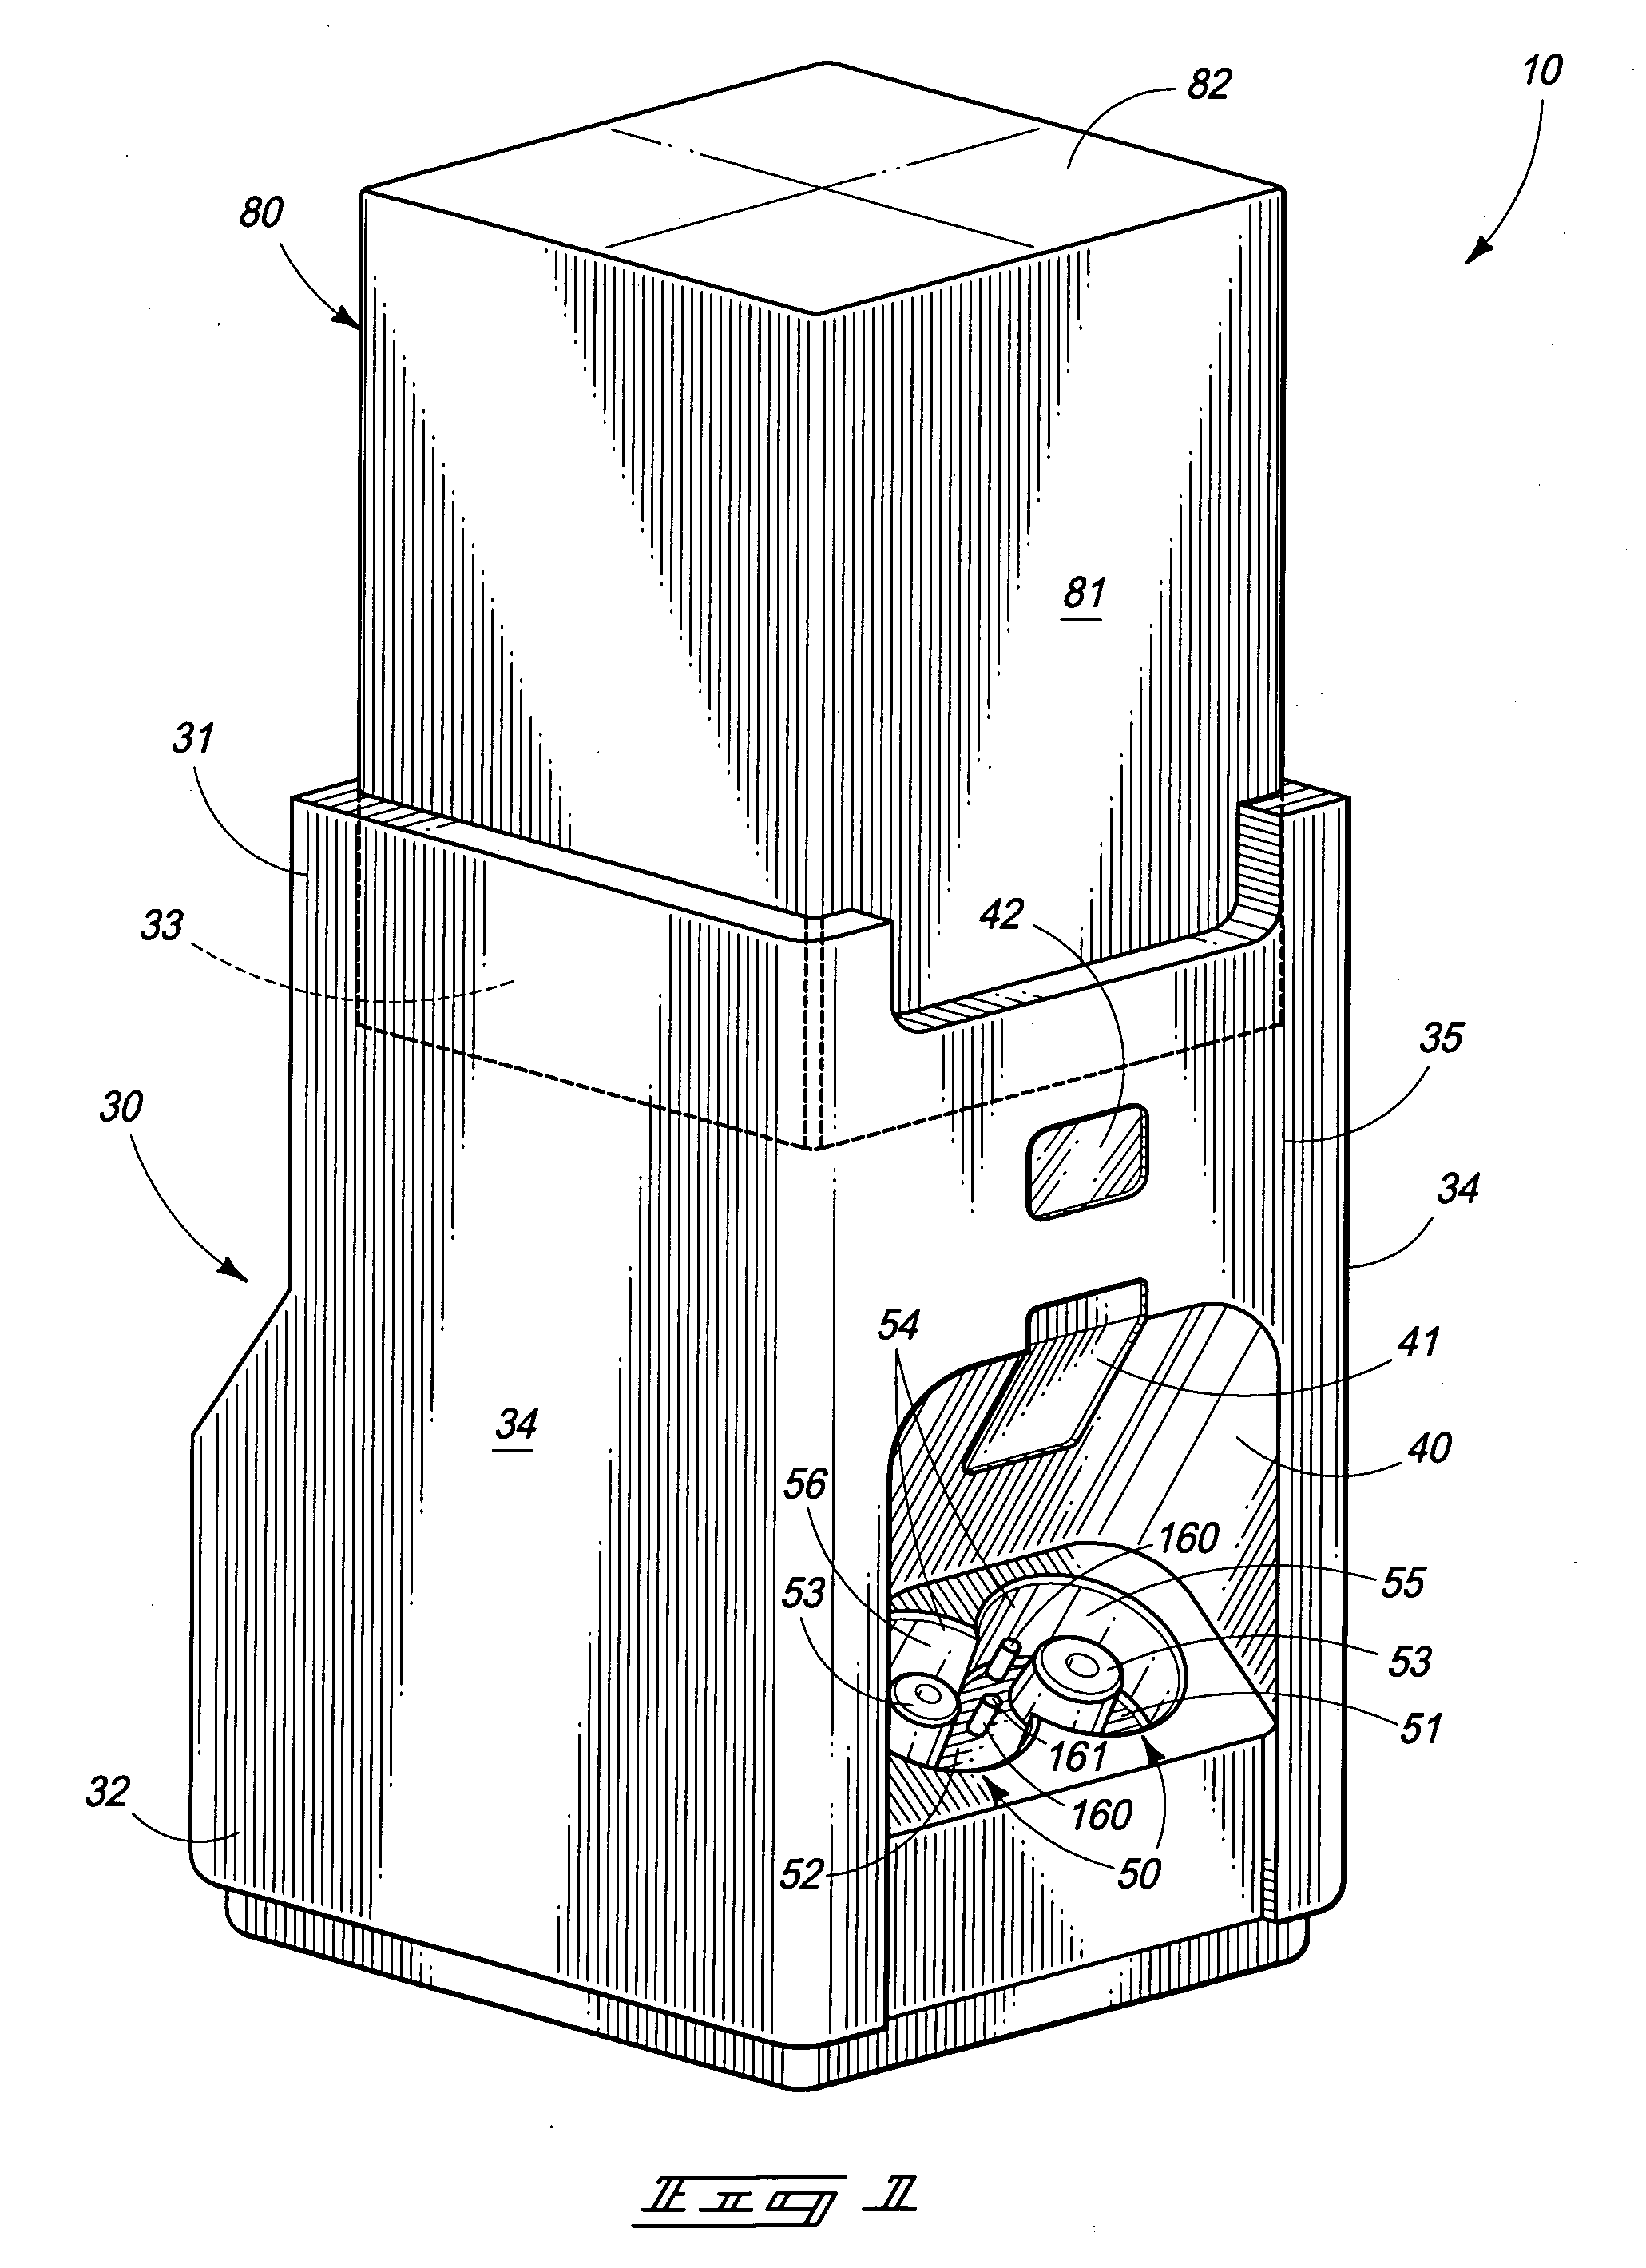 Apparatus and method for refilling a refillable container